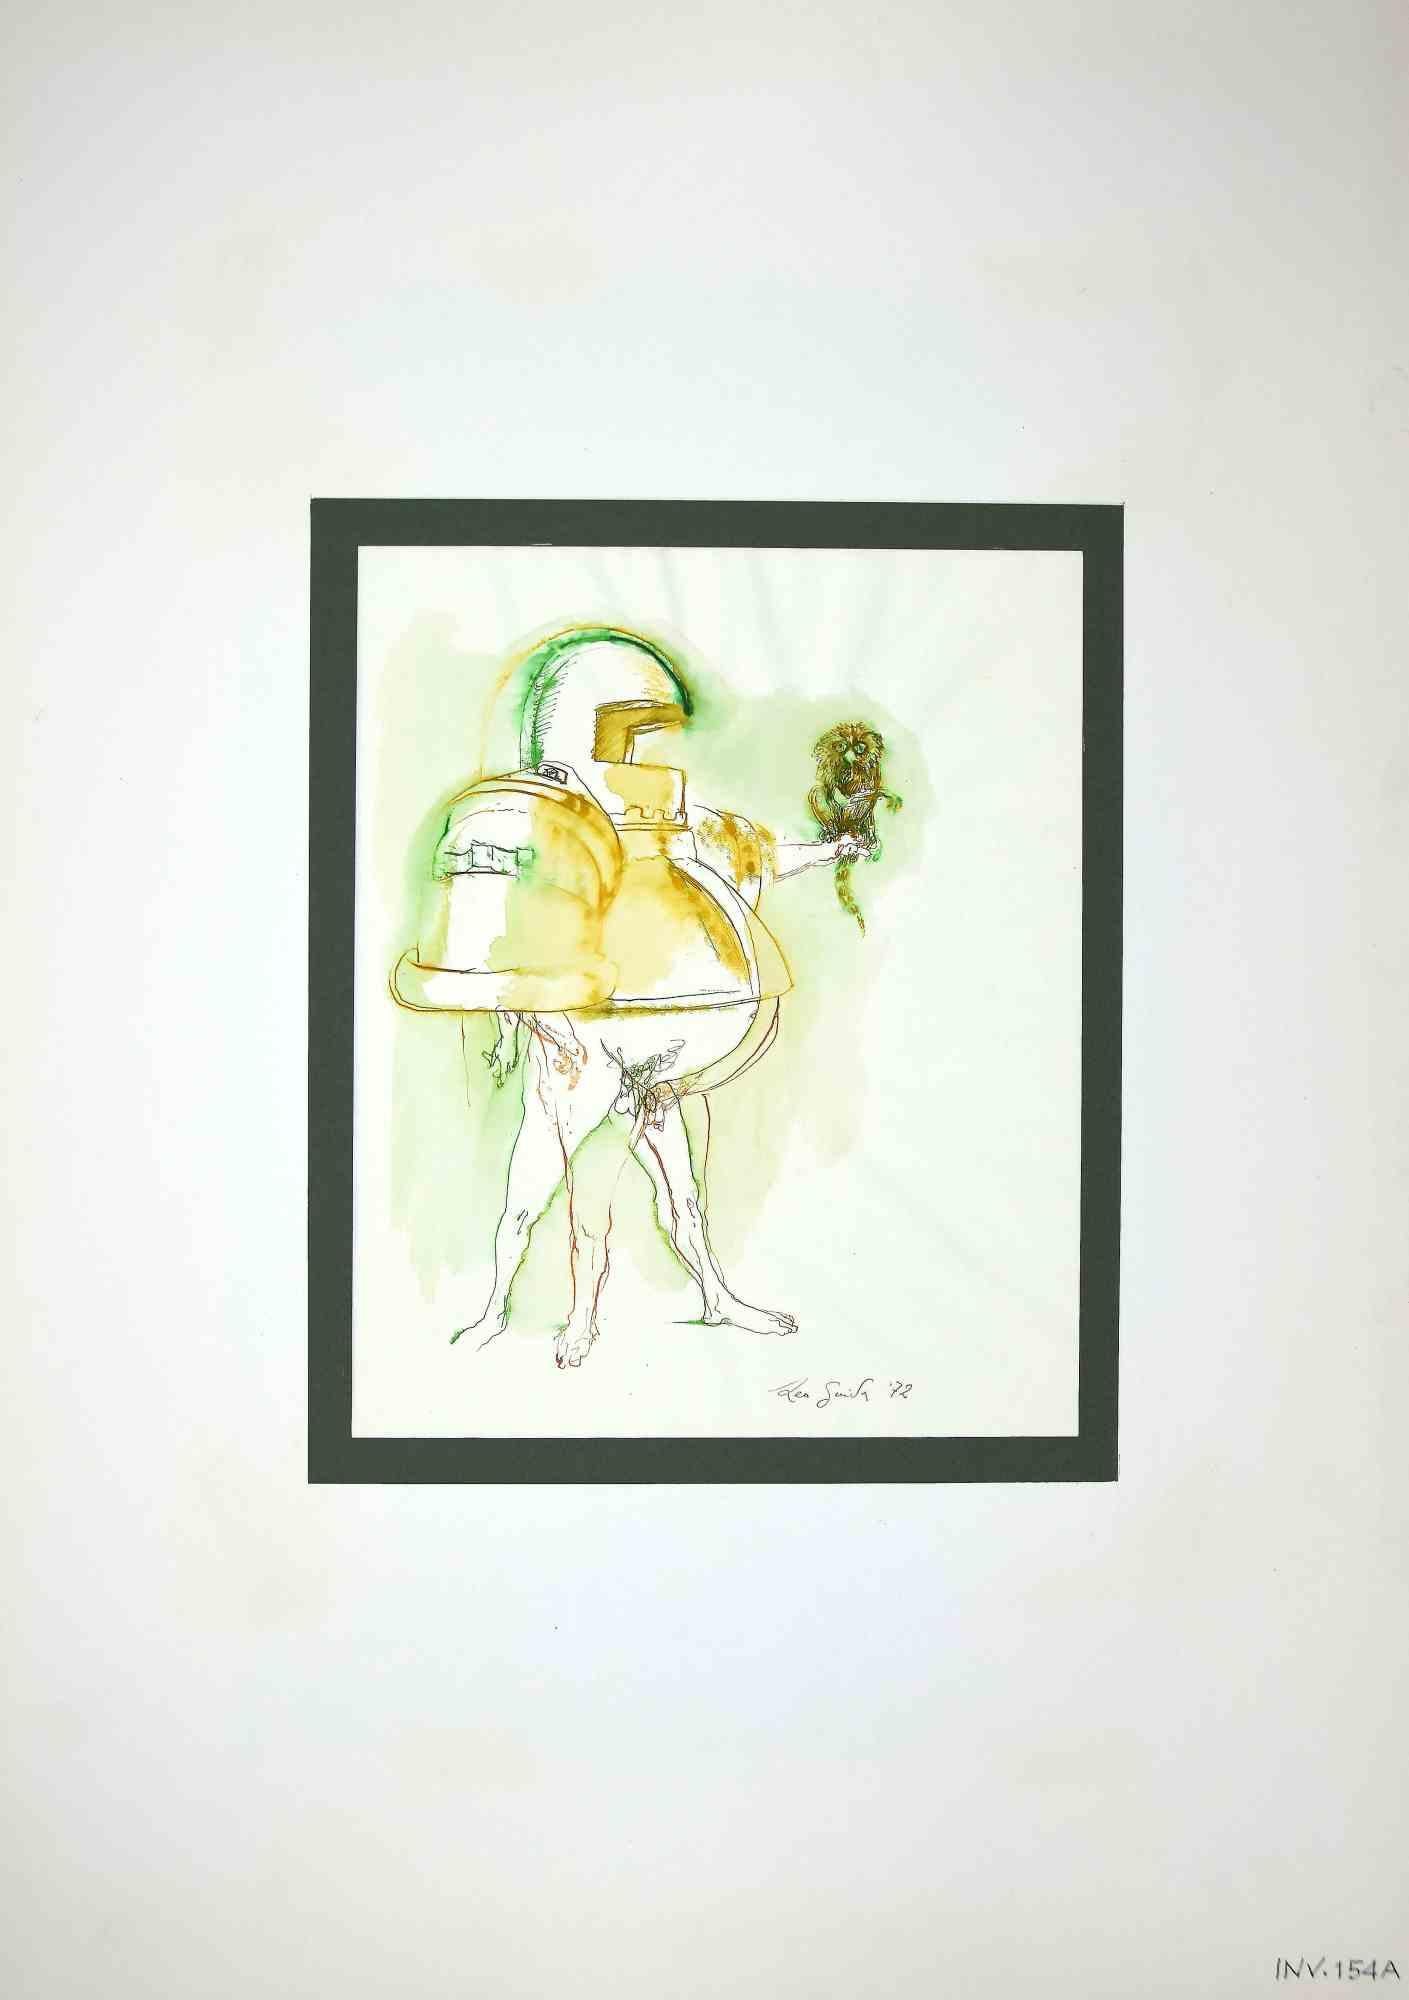 Knight and Lemur is an original drawing in china ink realized by Leo Guida in 1972.

Bon état.

Hand-signed.

The artwork is depicted through strong strokes.